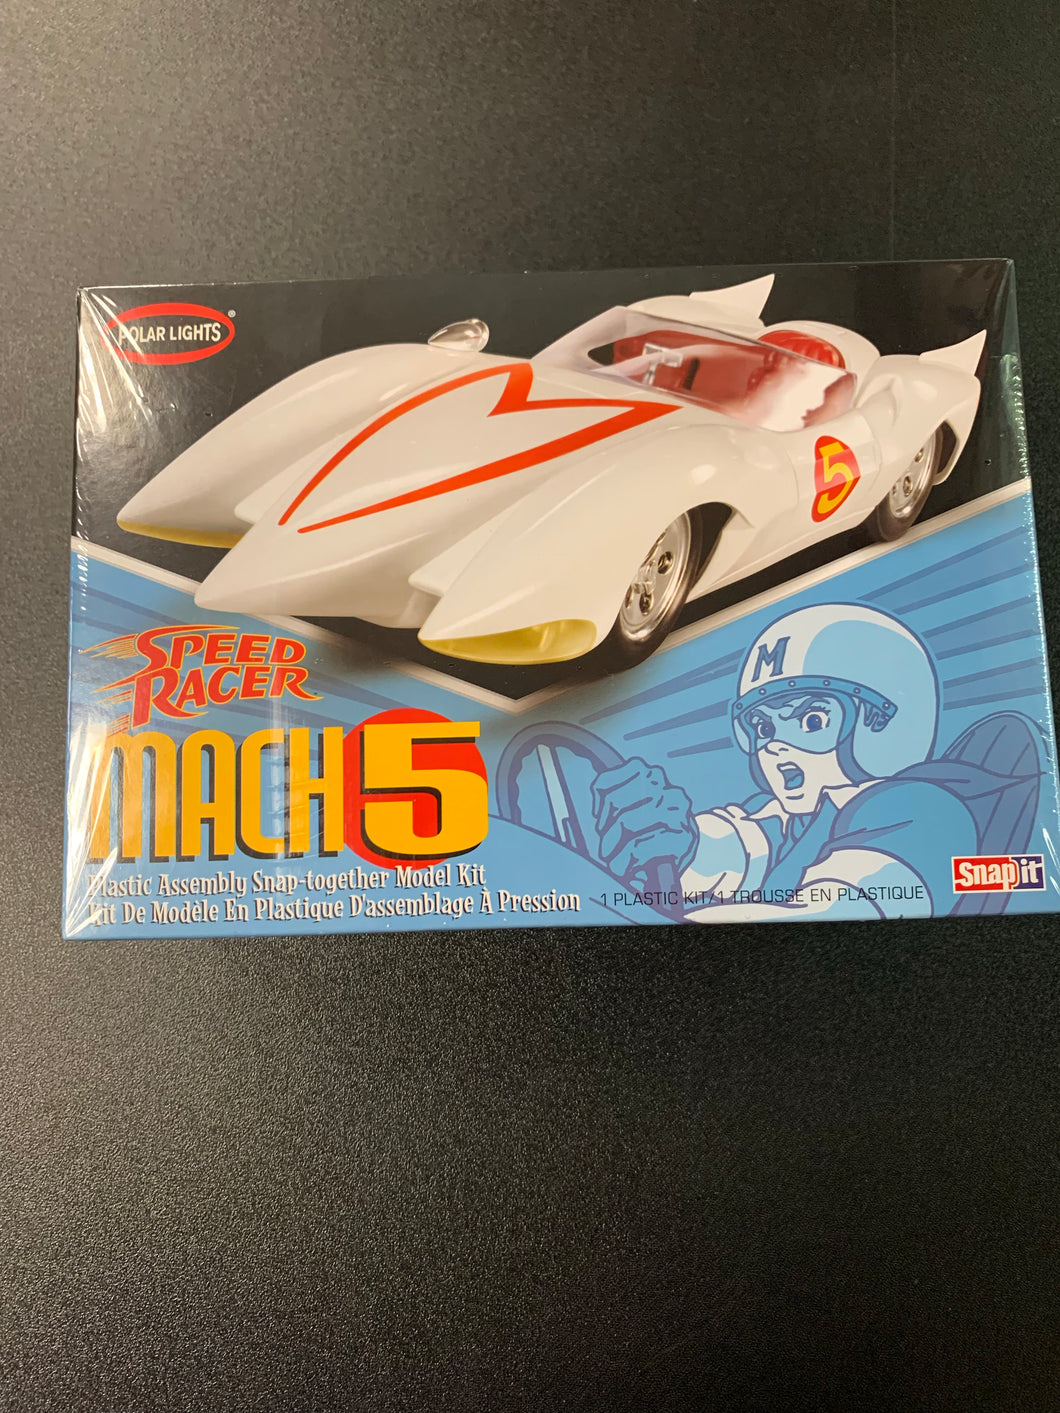 SPEED RACER MACH 5 PLASTIC ASSEMBLY SNAP TOGETHER MODEL KIT